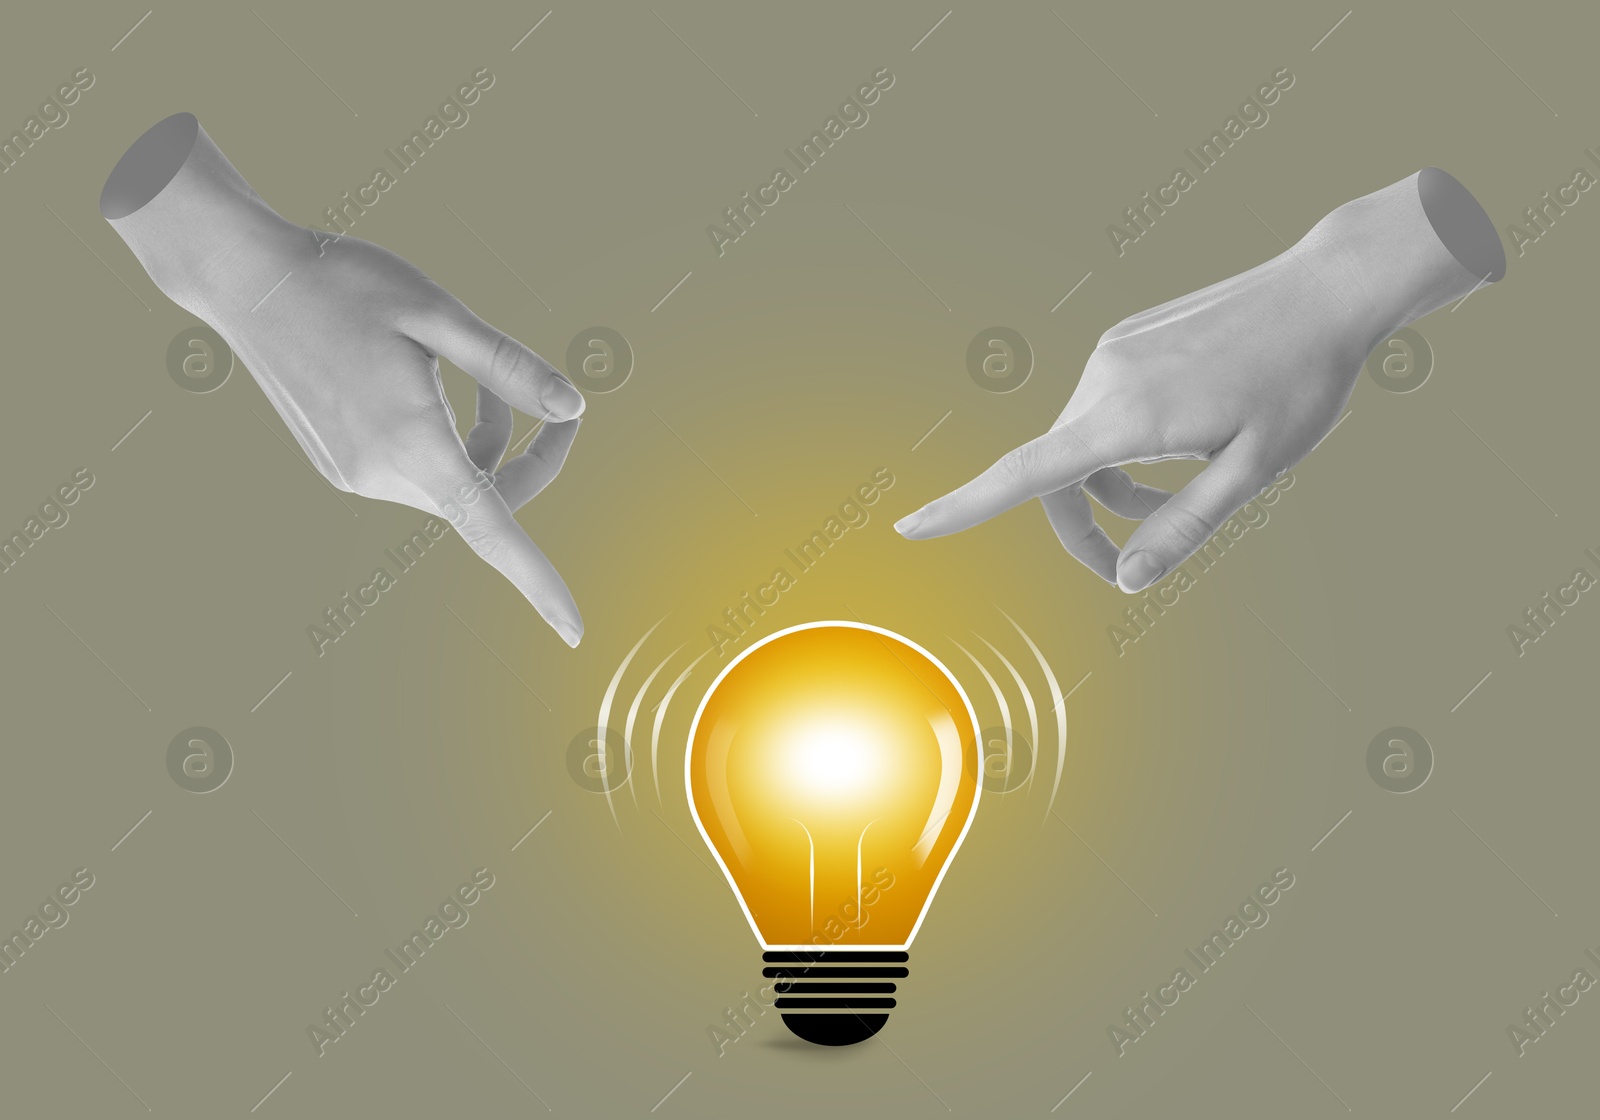 Image of Female hands and illustration of glowing light bulb on grey background, creative art collage